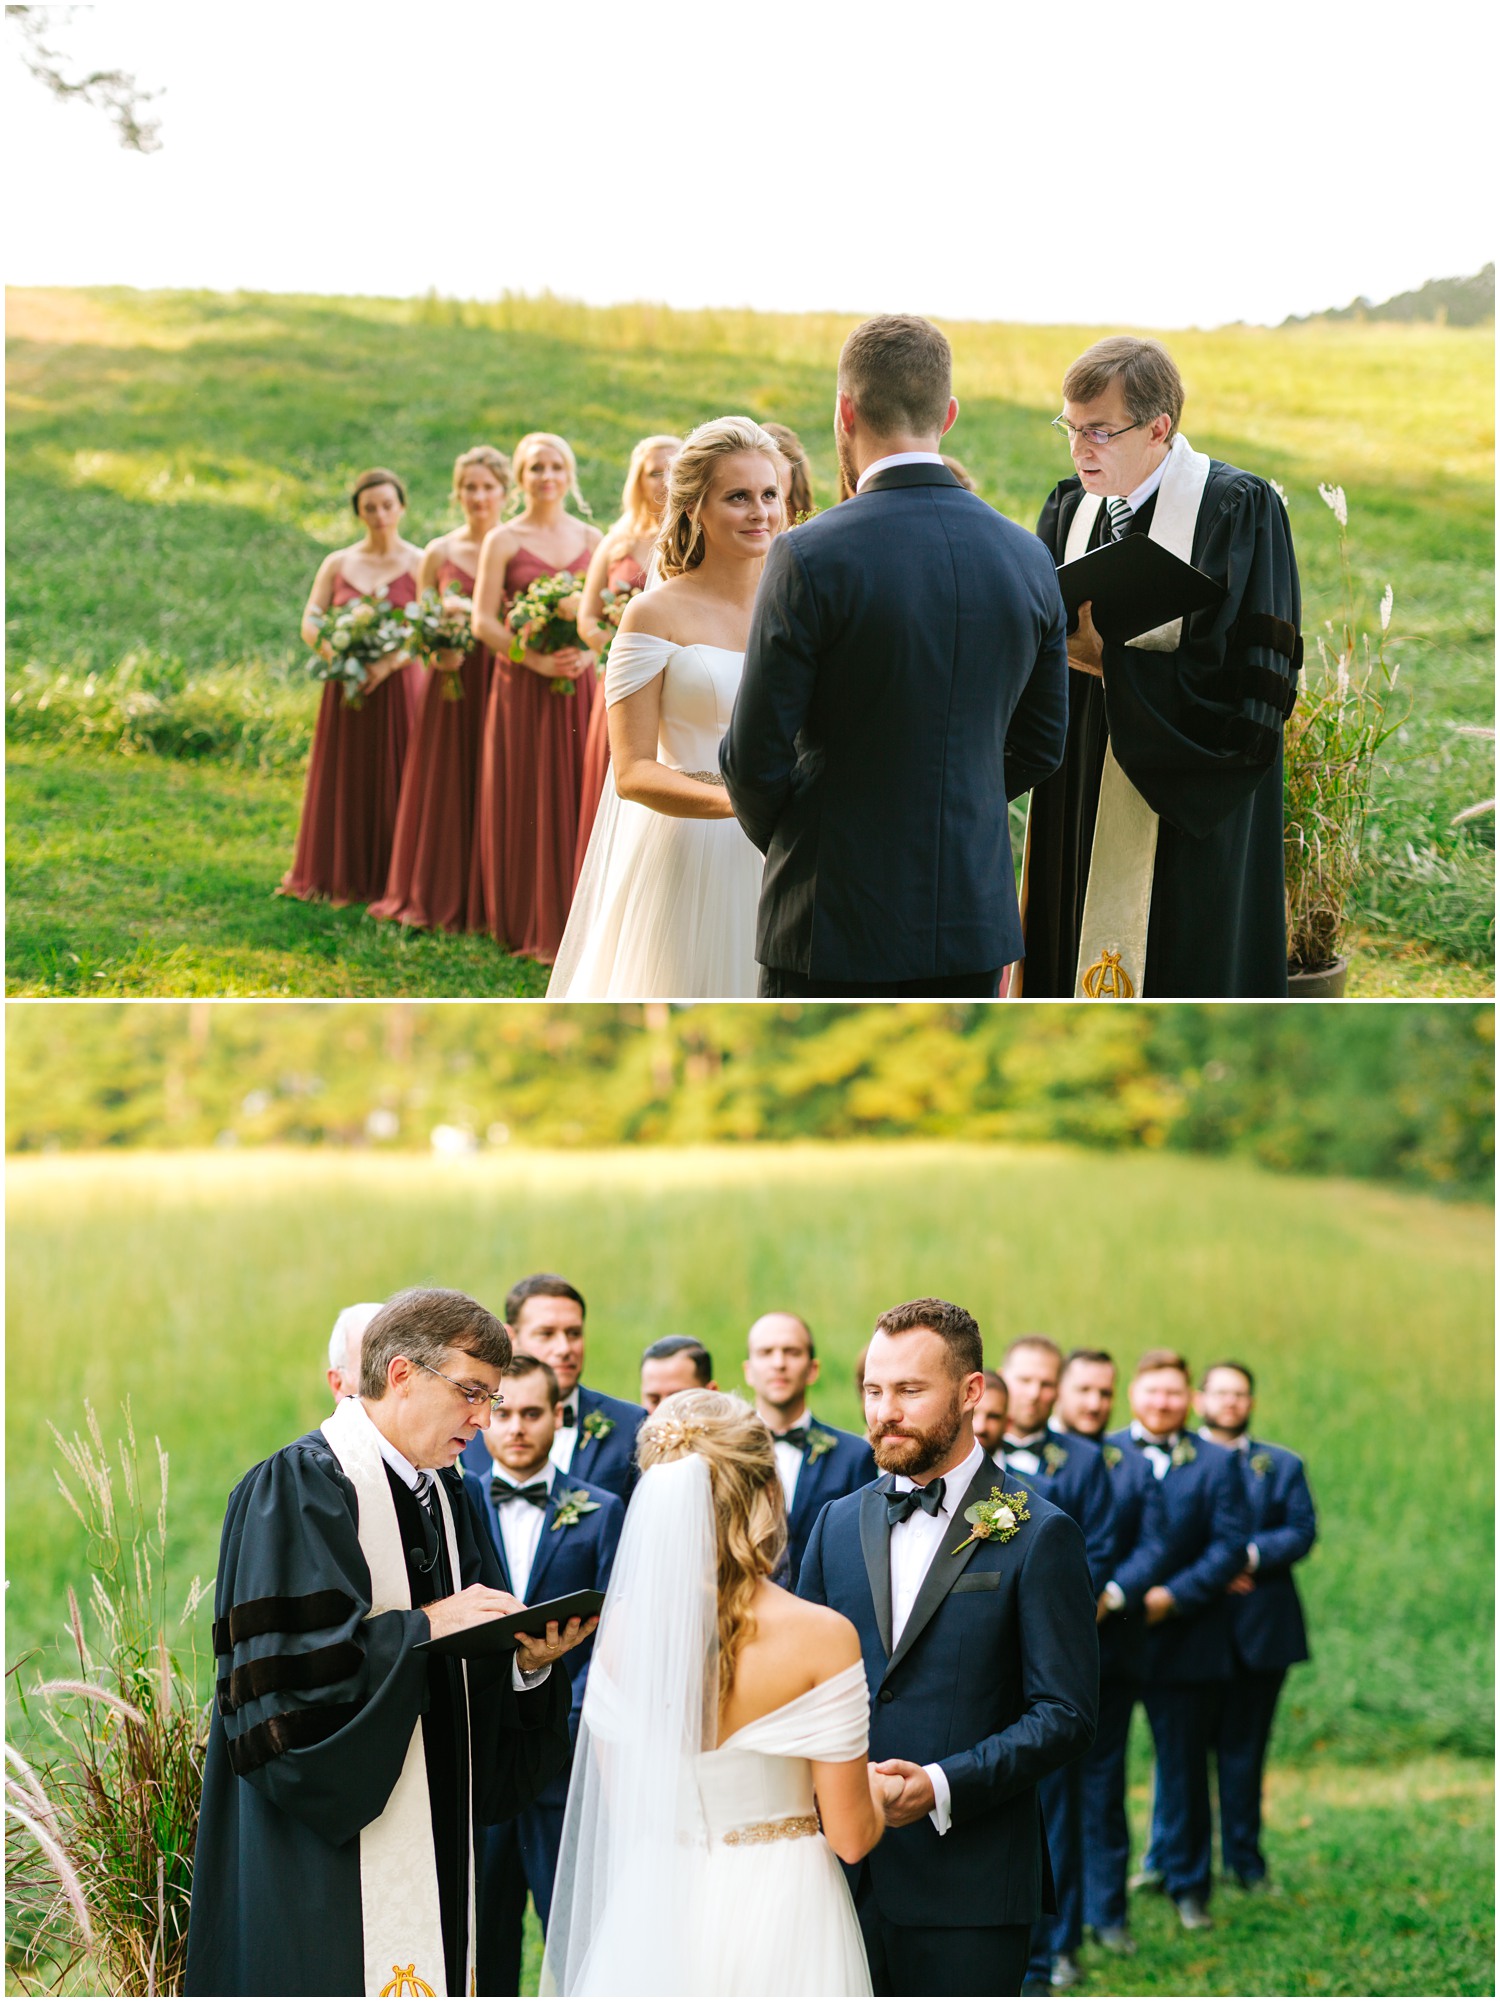 North Carolina wedding ceremony outside at The Meadows Raleigh